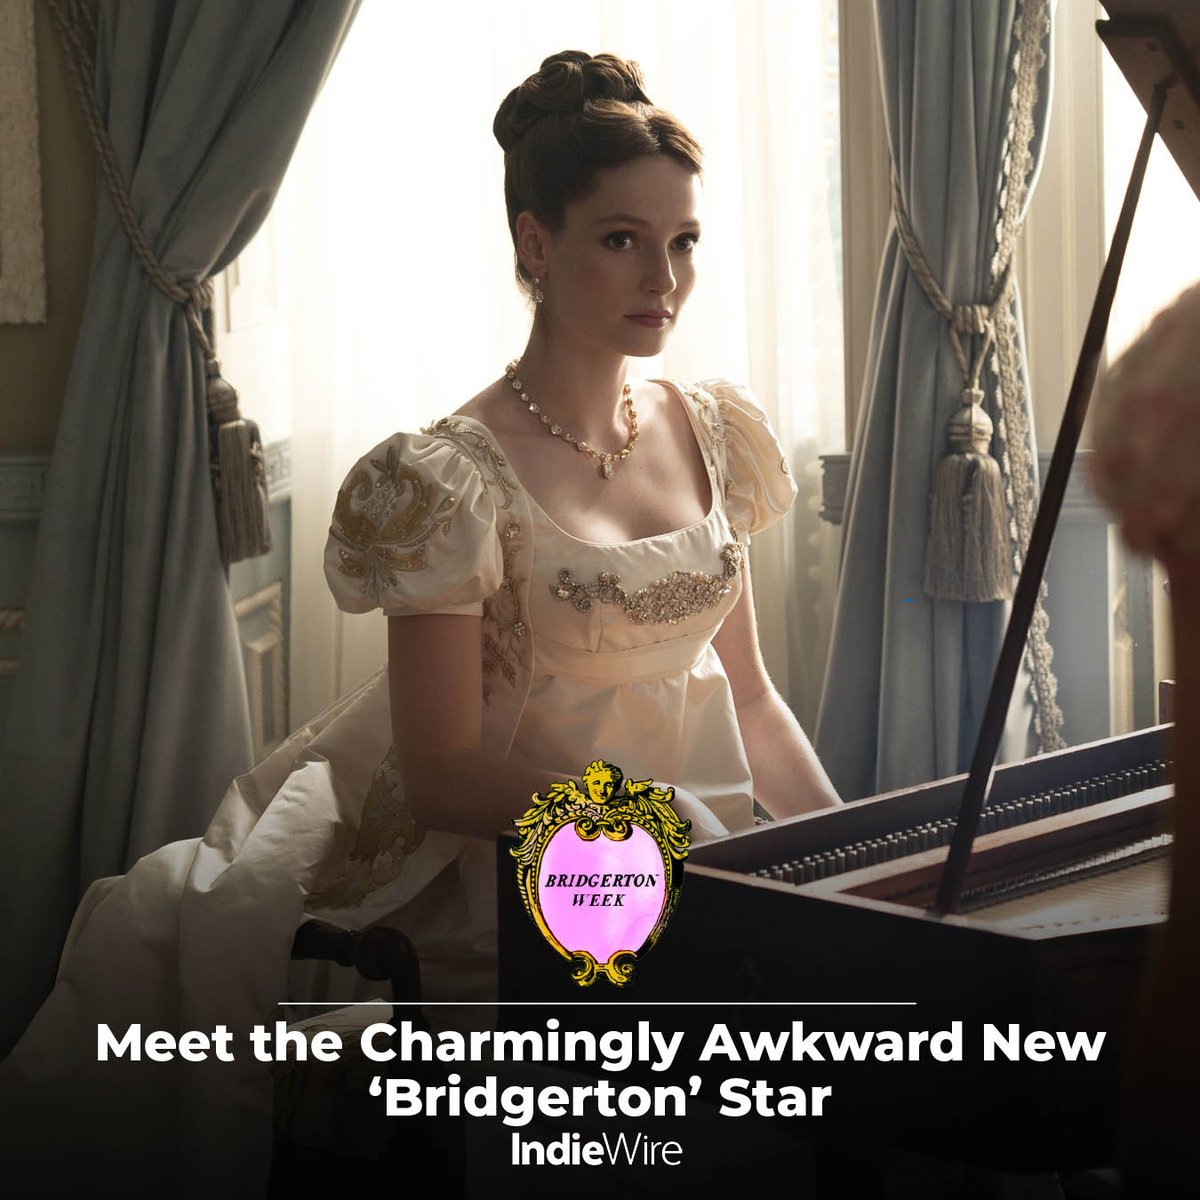 Hannah Dodd takes over the role of Francesca Bridgerton in Season 3. 'She's described in the books as kind of the odd one out...' Read more from #BridgertonWeek at IndieWire: trib.al/iXKCW4y